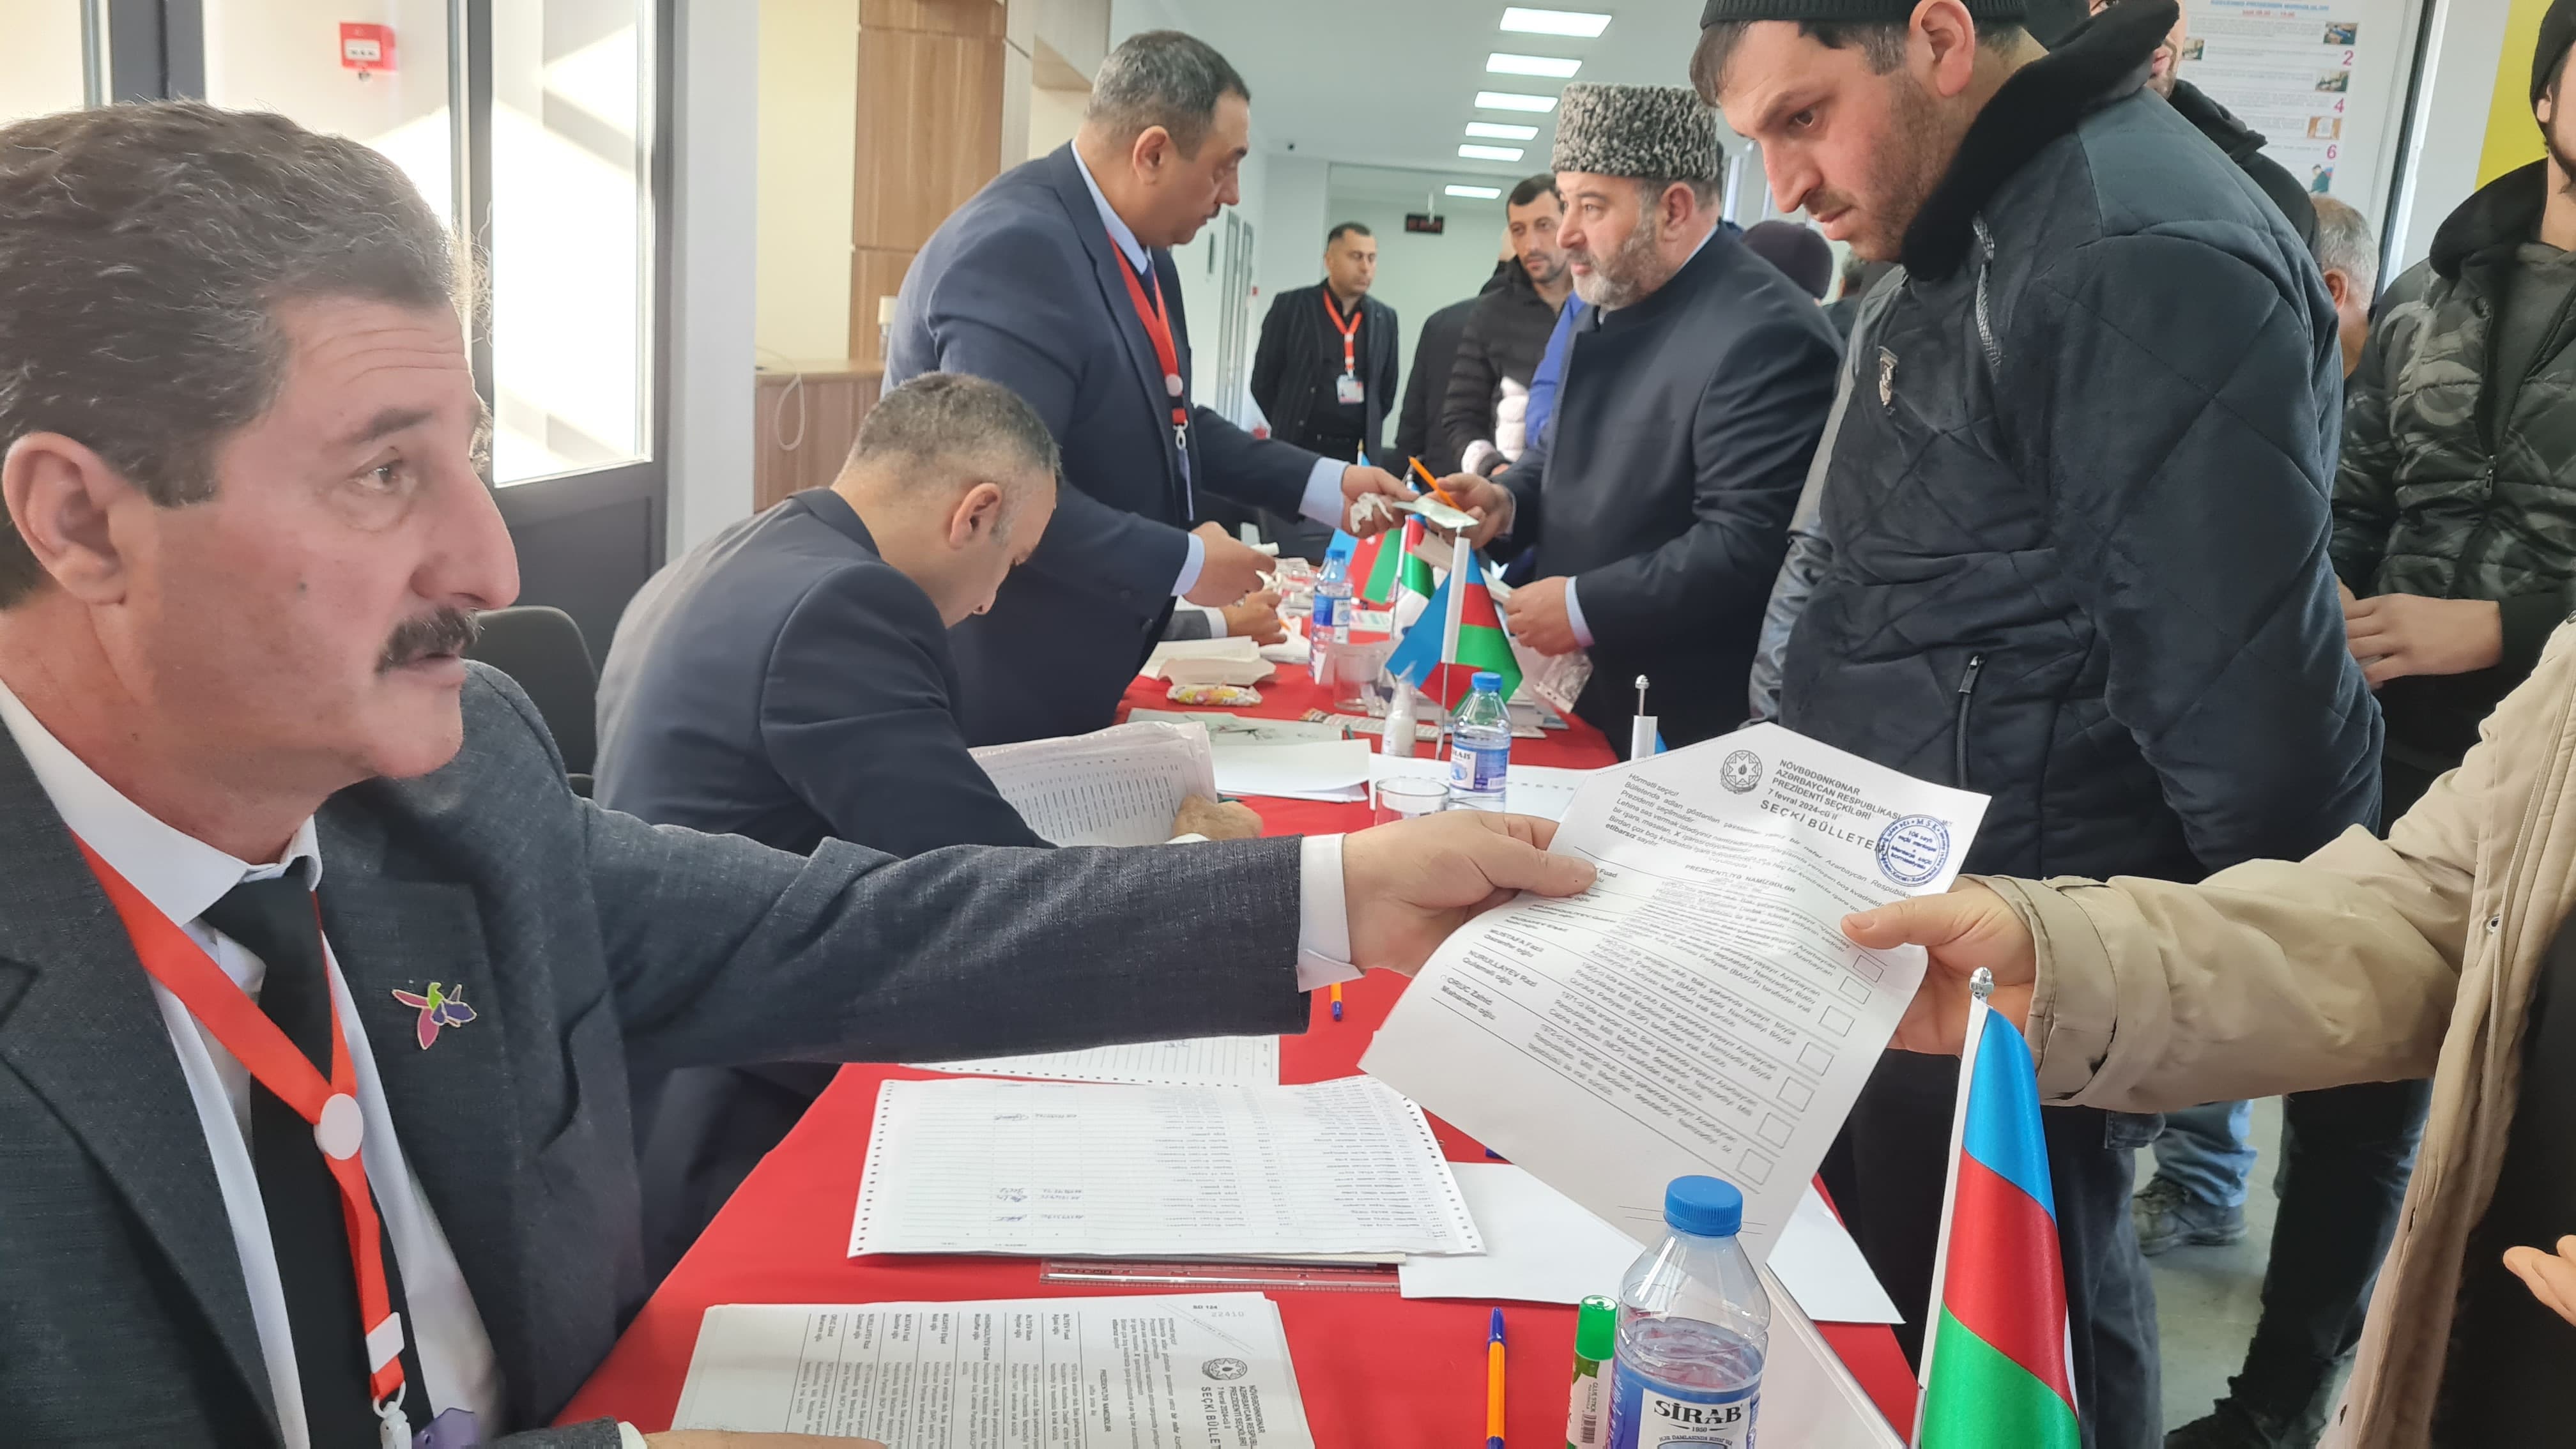 38.57% of voters have cast their votes at presidential elections in Azerbaijan as of 12:00